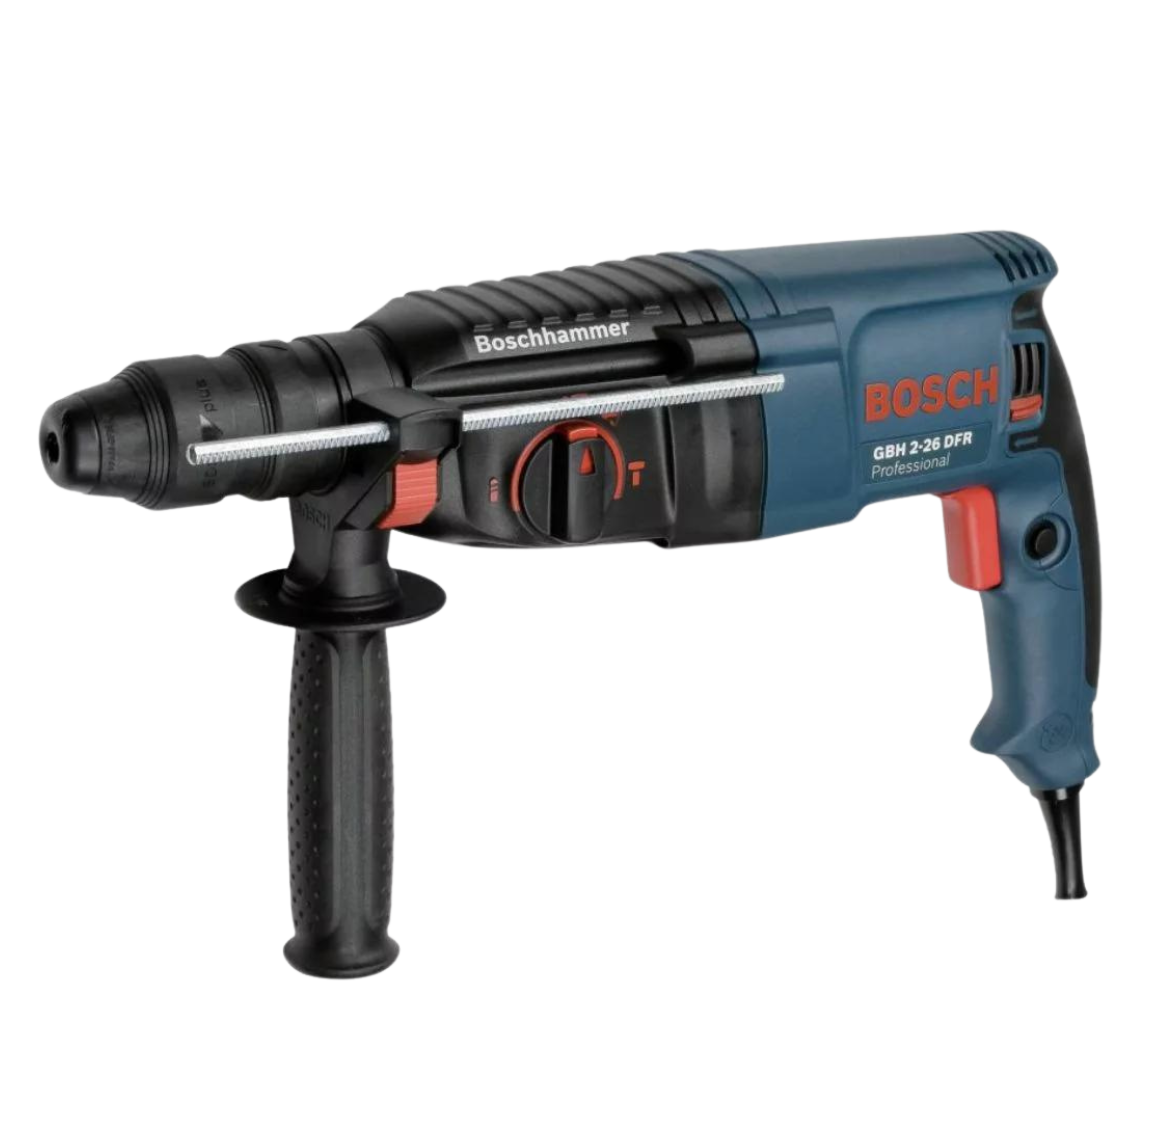 BOSCH-PROFESSIONAL-Rotary-Hammer-Drill-with-SDS-plus-GBH-2-26-DFR